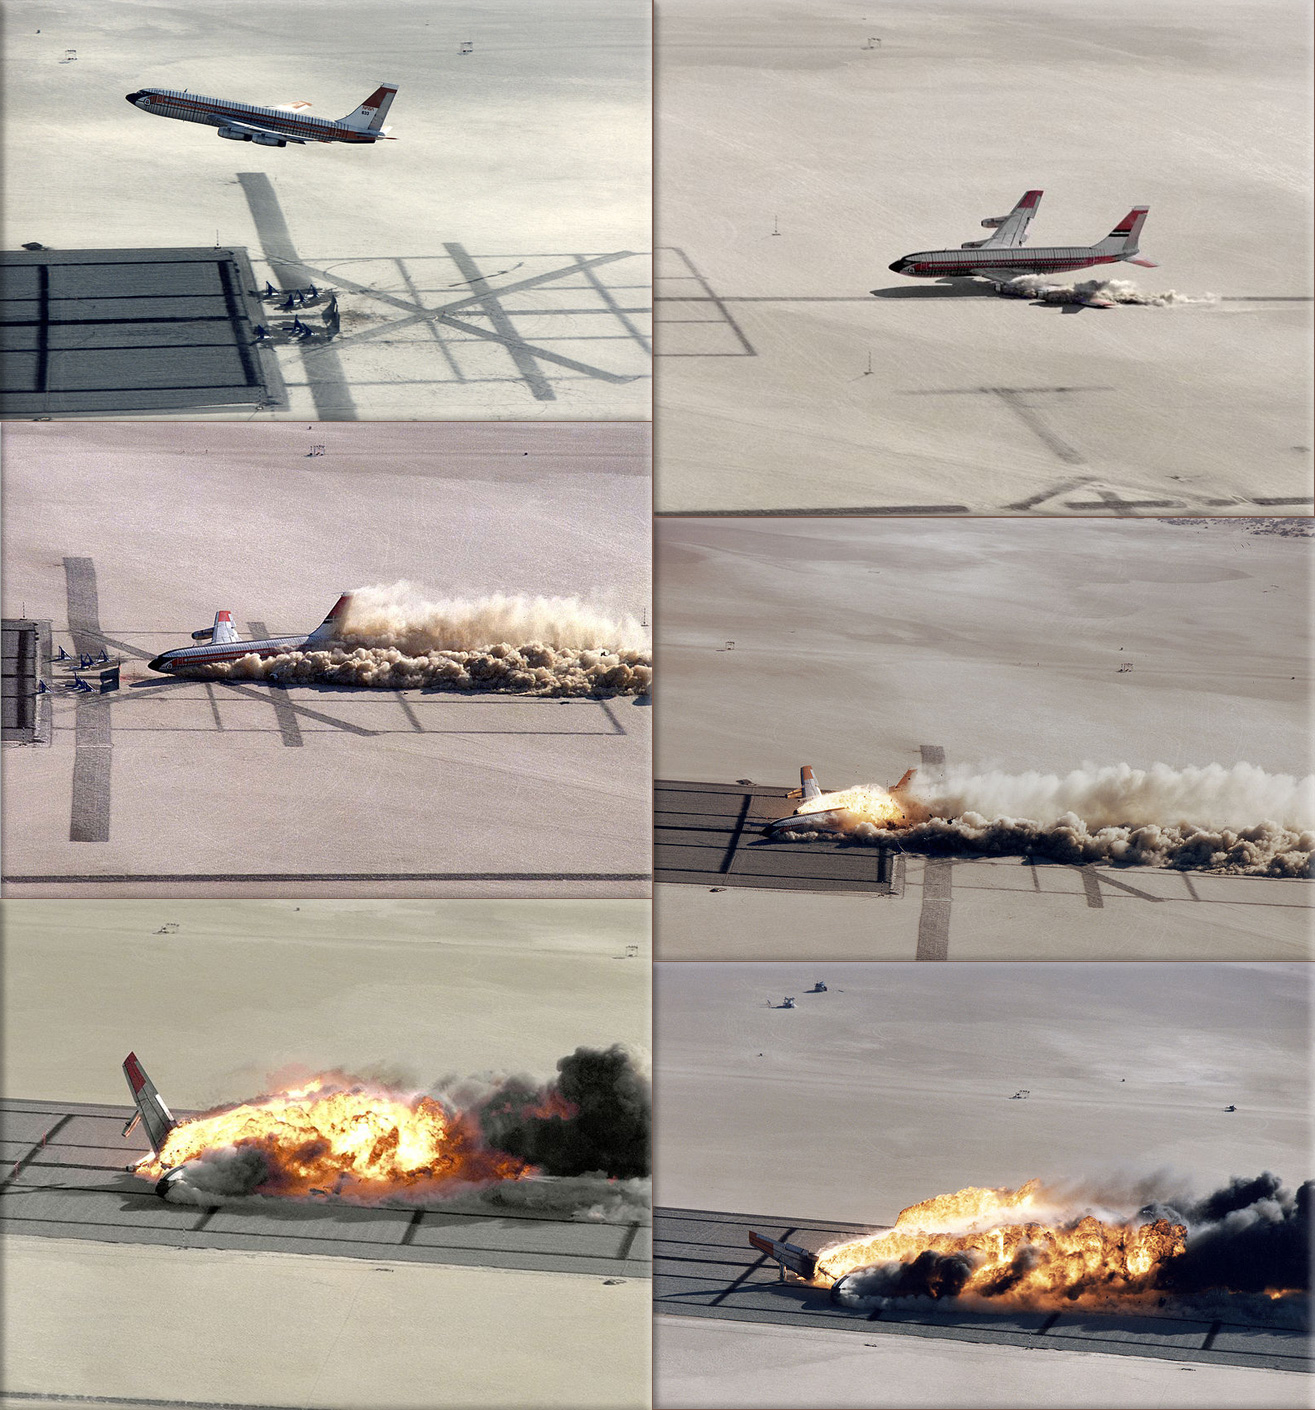 NASA conducts the Controlled Impact Demonstration, wherein an airliner was deliberately crashed in order to test technologies and gather data to help improve survivability of airplane crashes